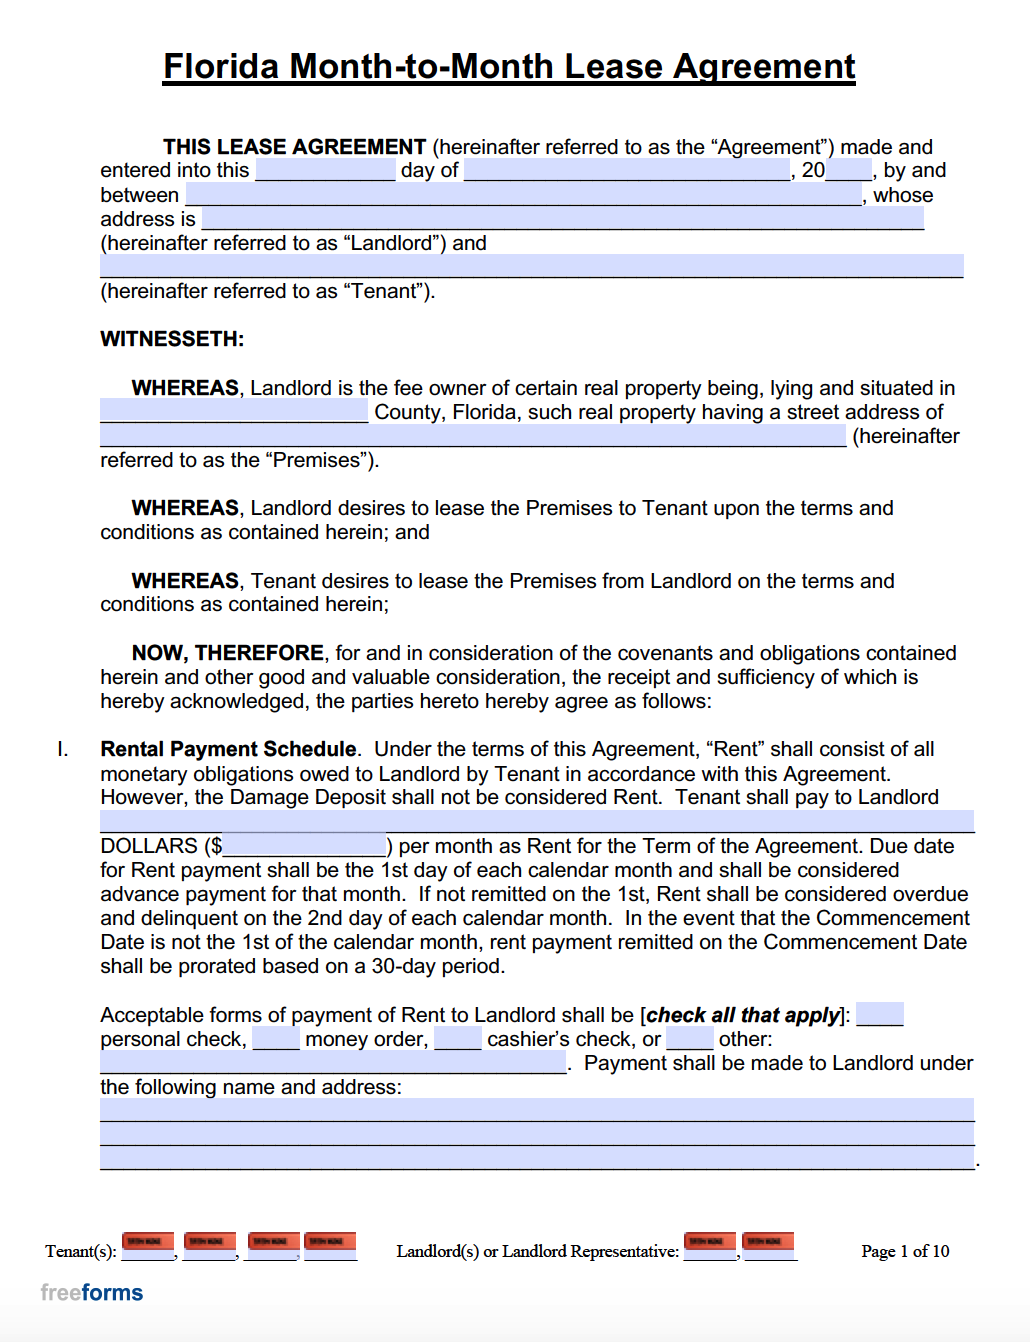 florida-residential-lease-agreement-short-form-printable-form